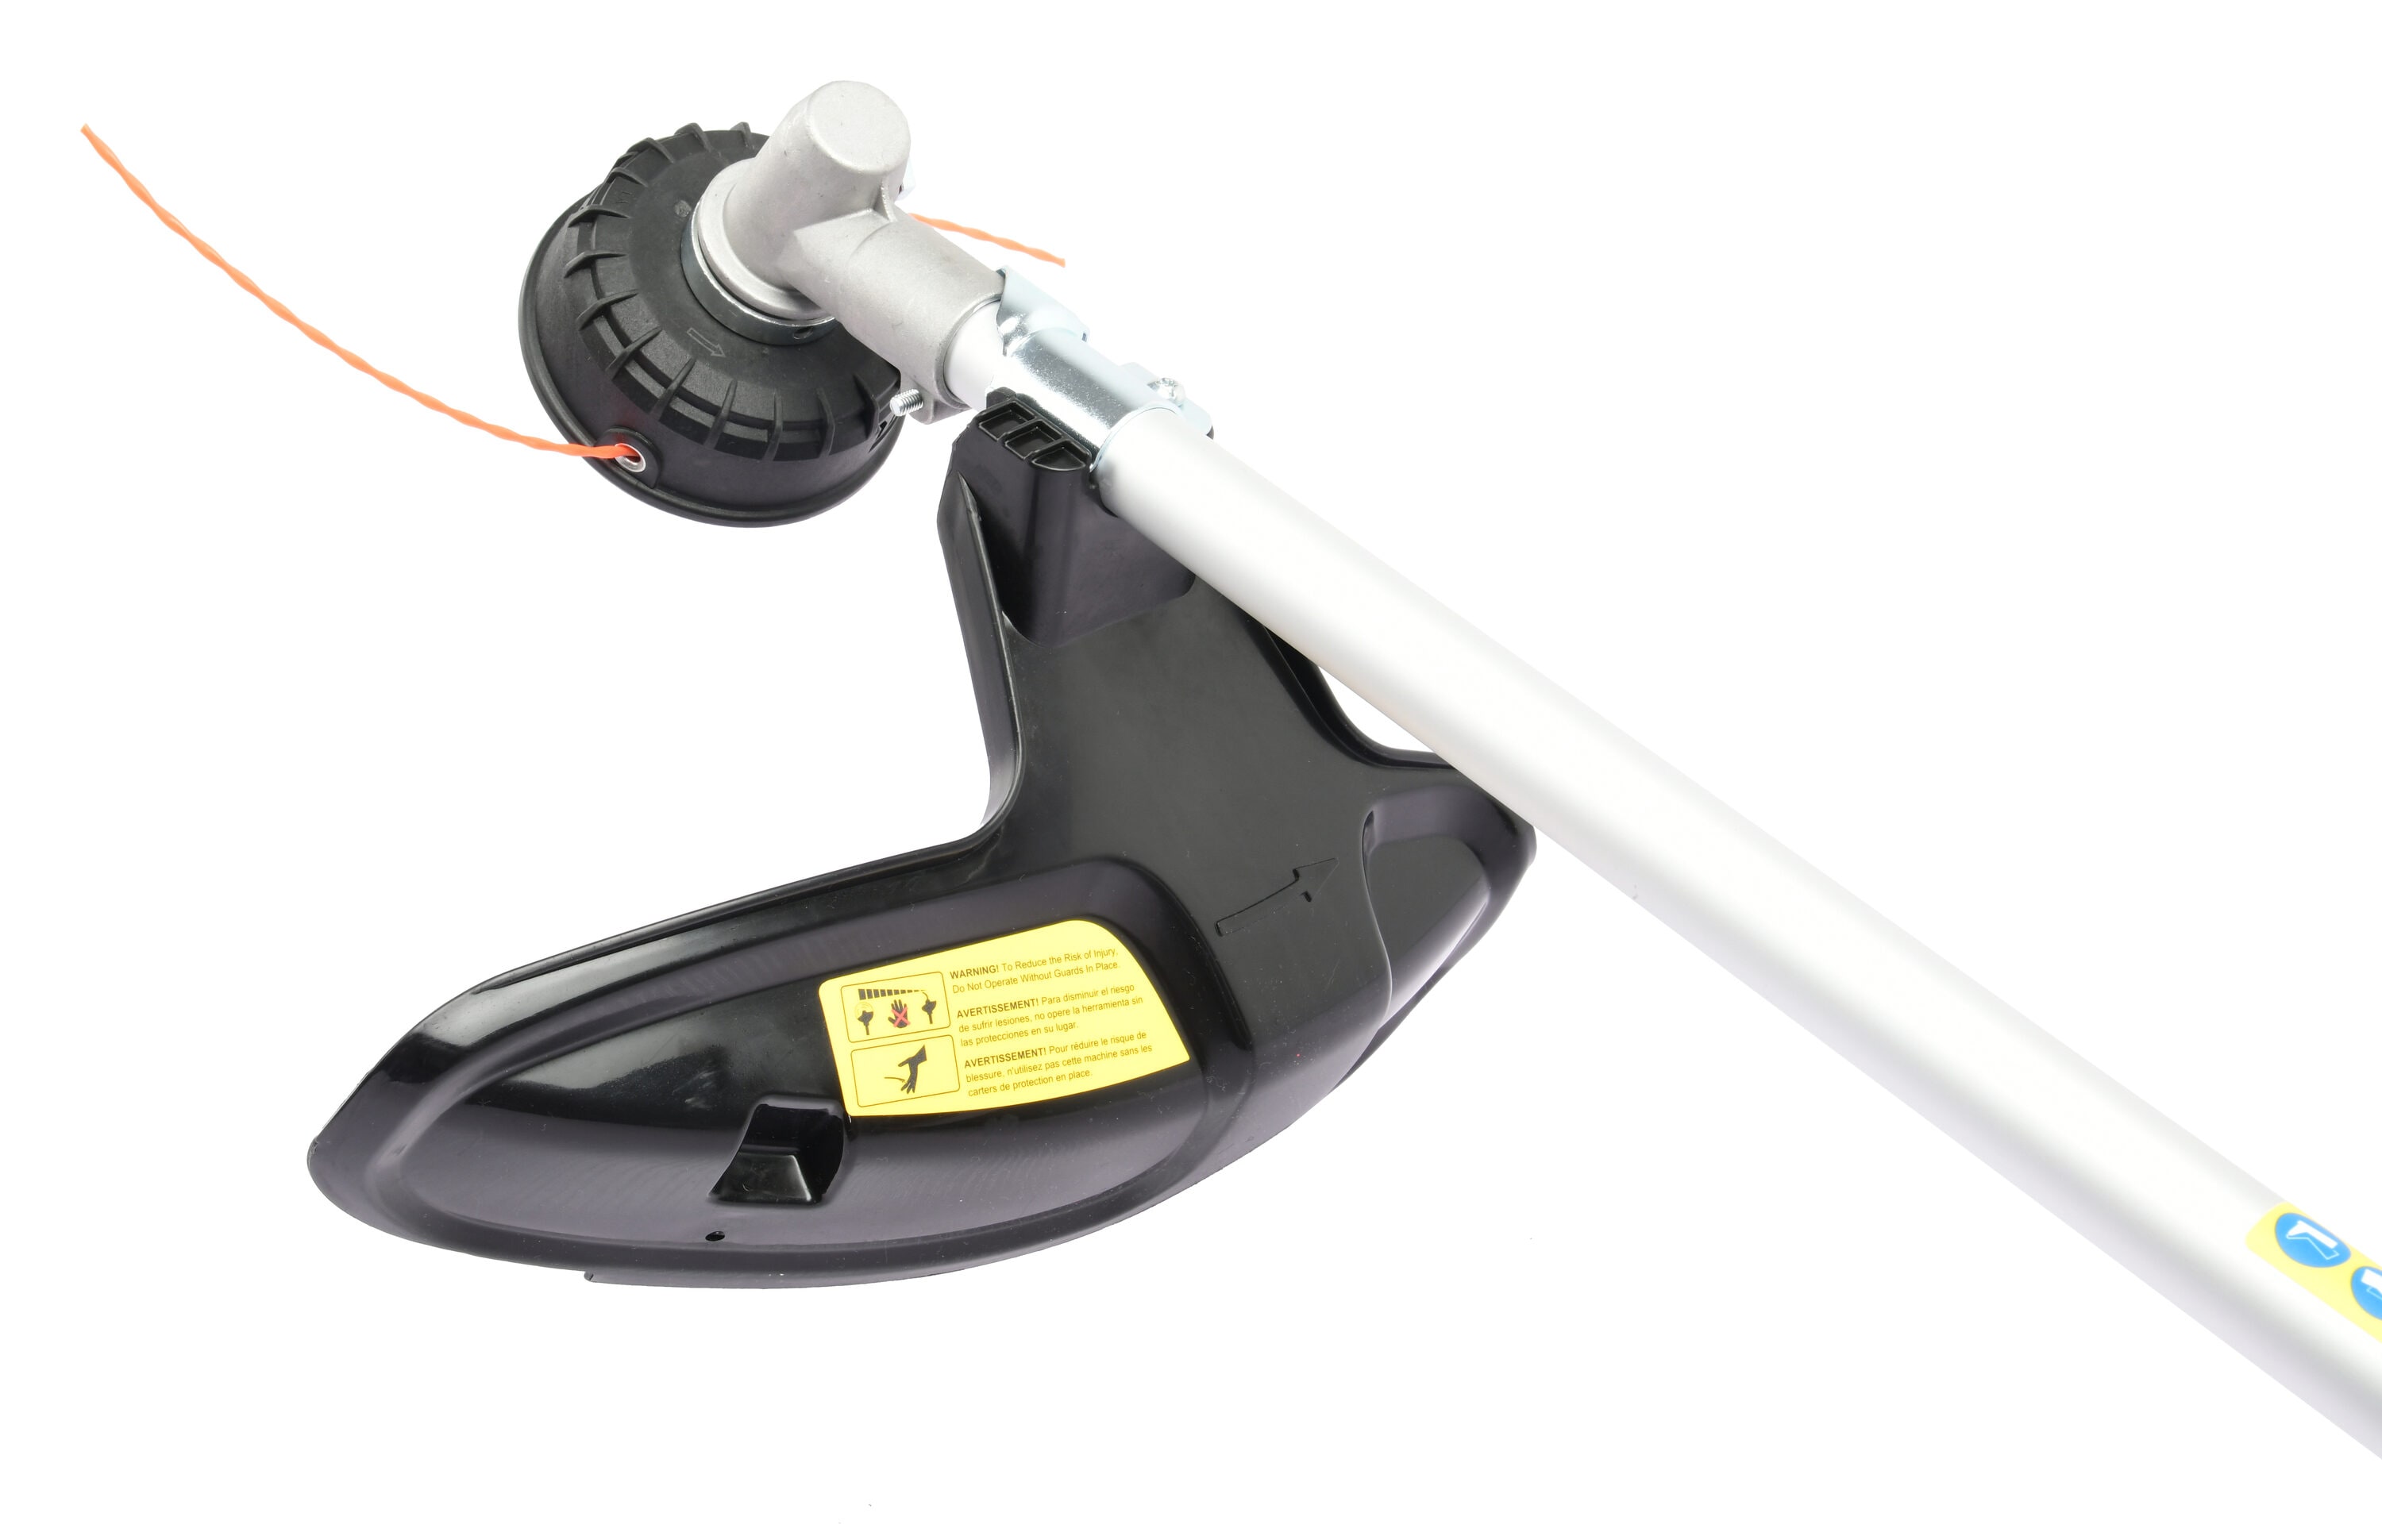 SENIX 4QL Attachment 4-cycle String Straight Shaft 26.5-cc Trimmers at Gas in Capable 17-in String department the Trimmer